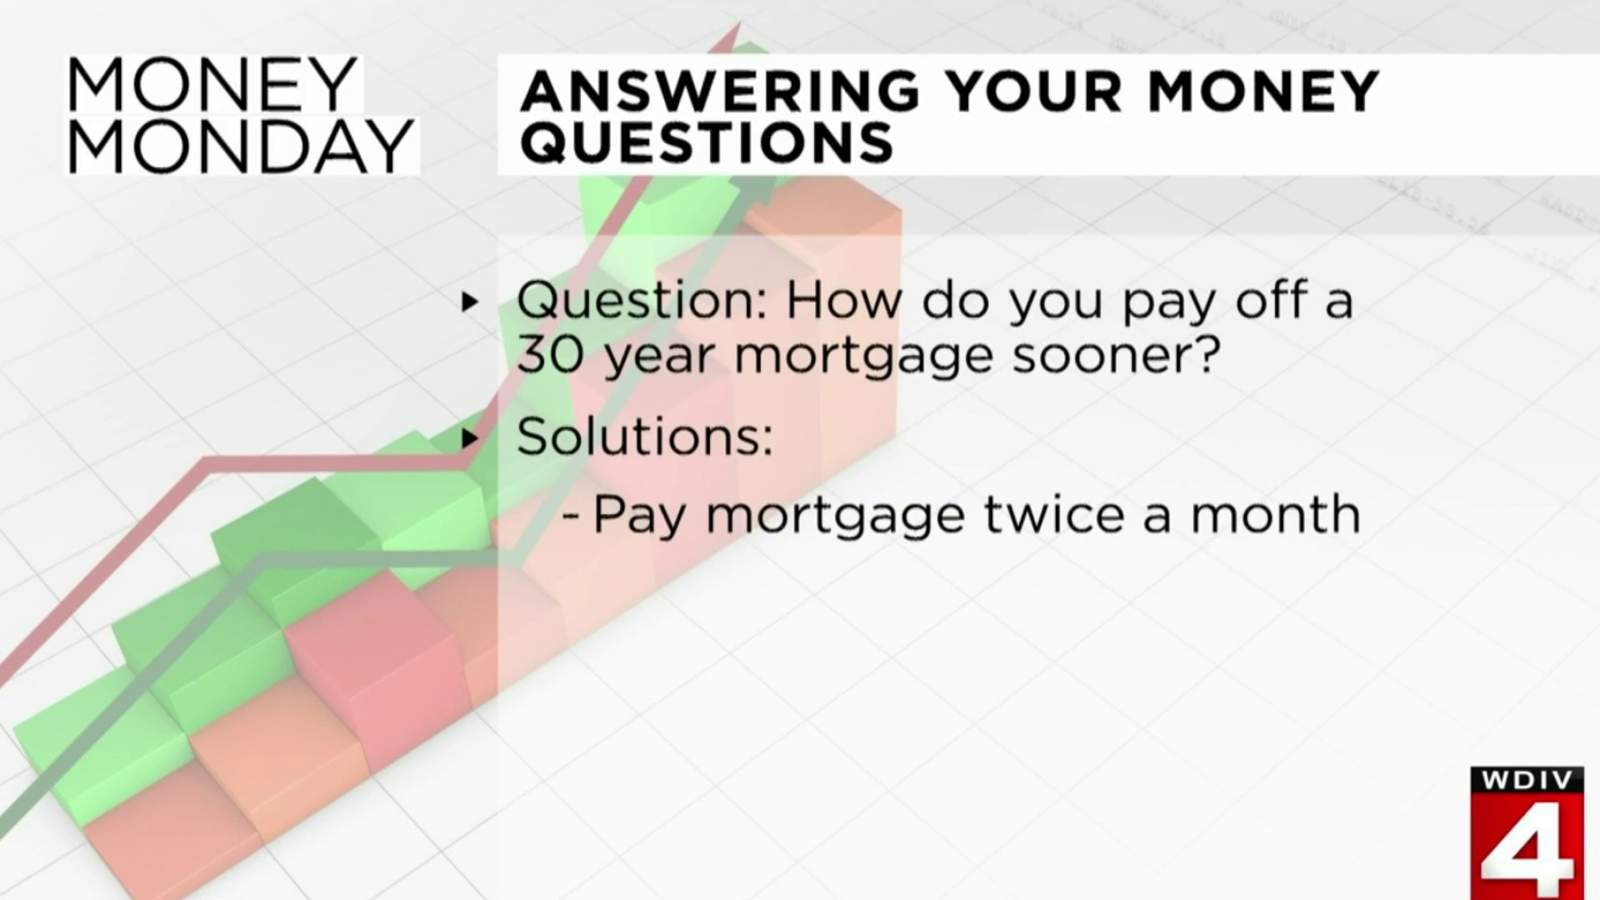 Money Monday: Answering your money questions